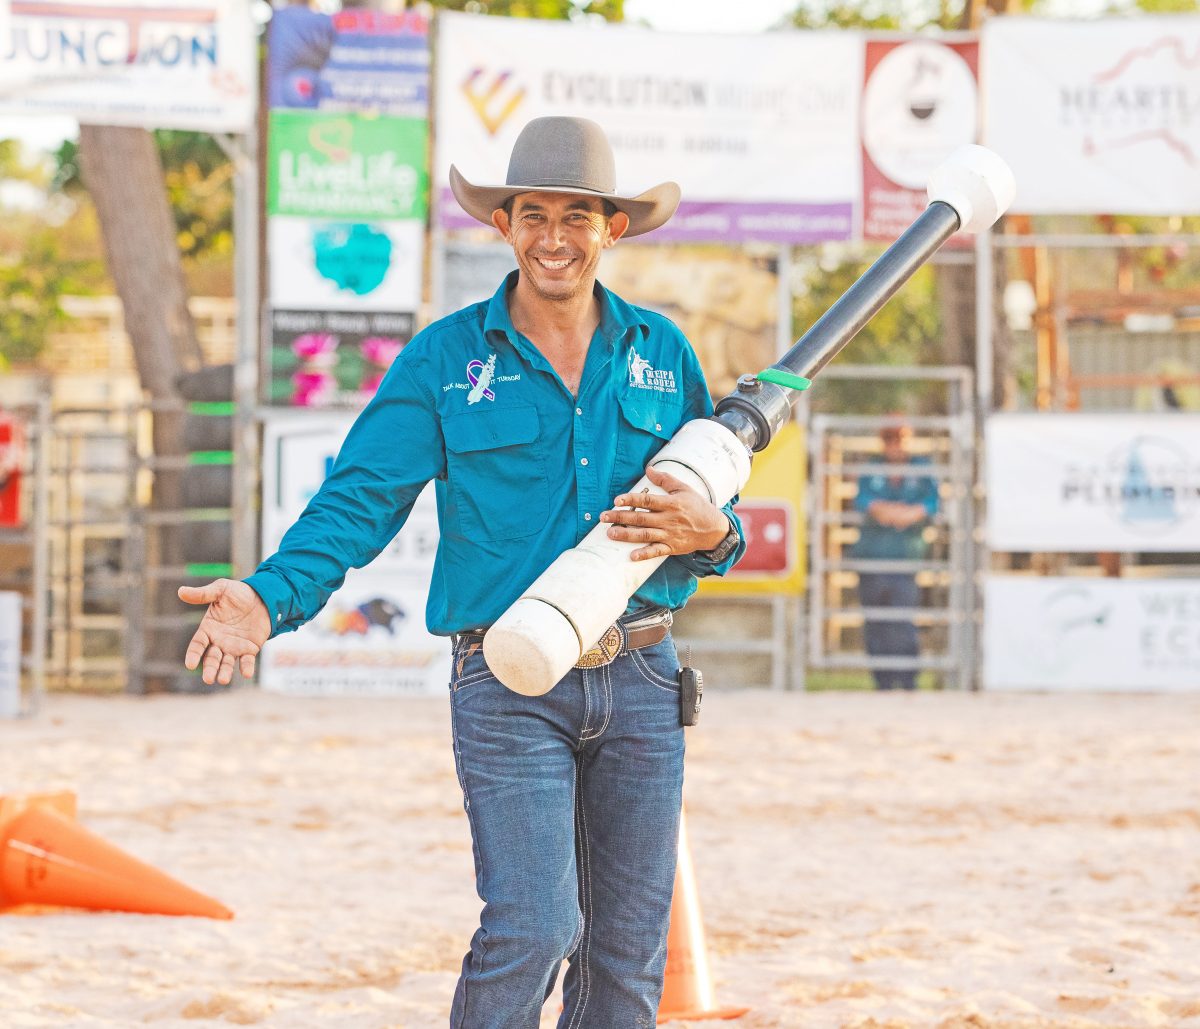 Weipa Rodeo Association president Russell Scikluna had big shoes to fill in the absence of Luke Quartermaine, but kept the kids happy with regular trips around the arena with the lolly gun.